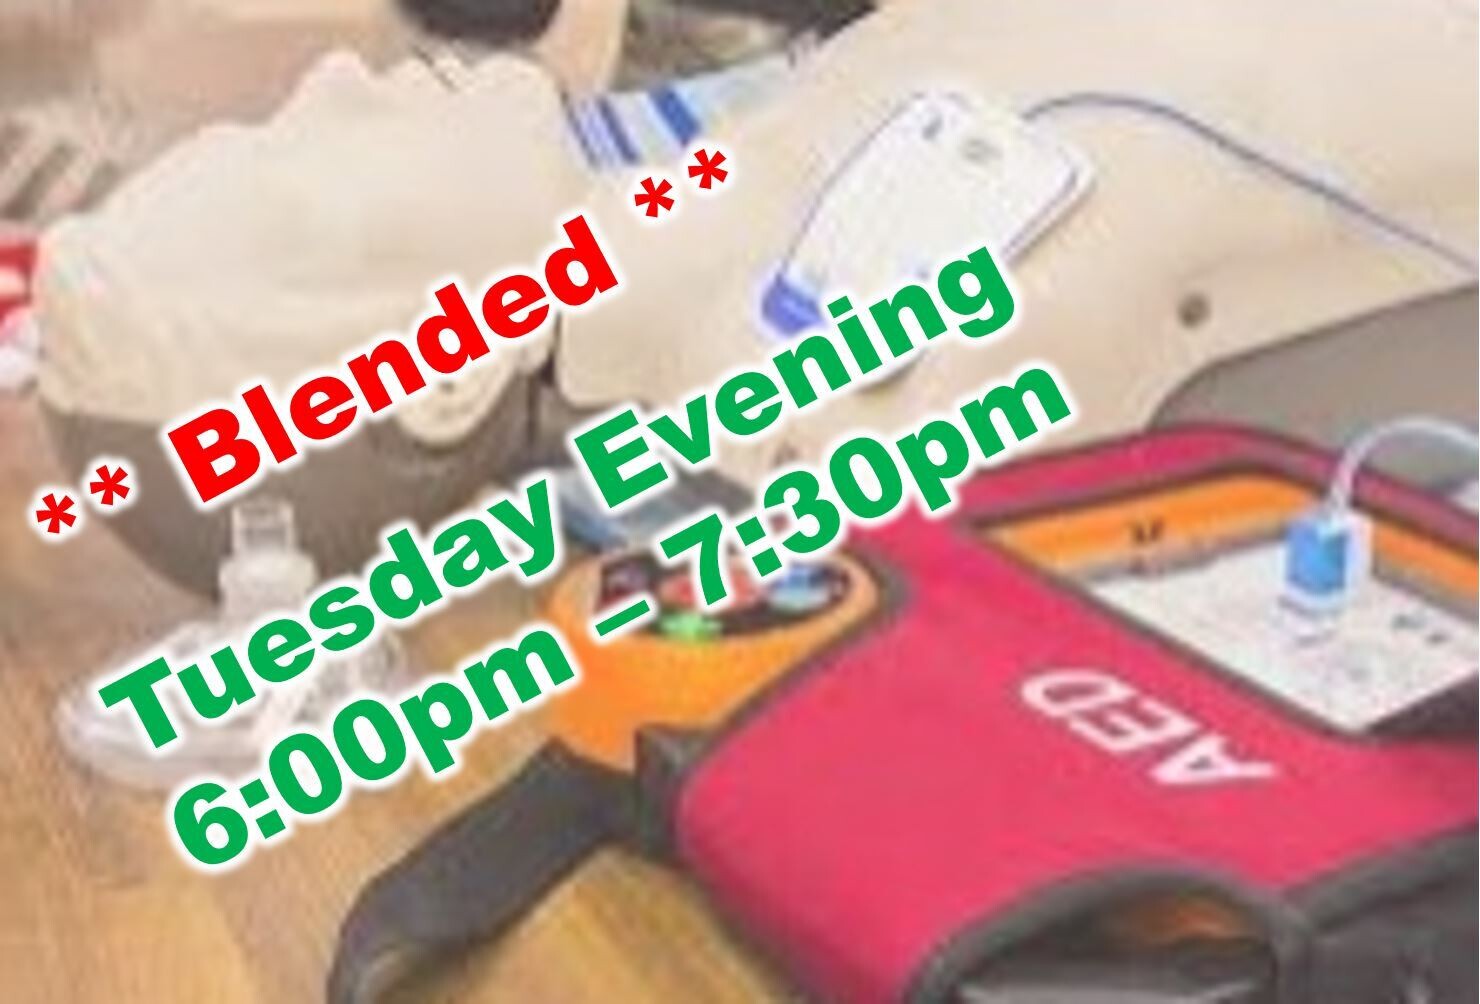 Aug. 23rd, 2022 (Tuesday) 6:00pm-7:30pm CPR Class